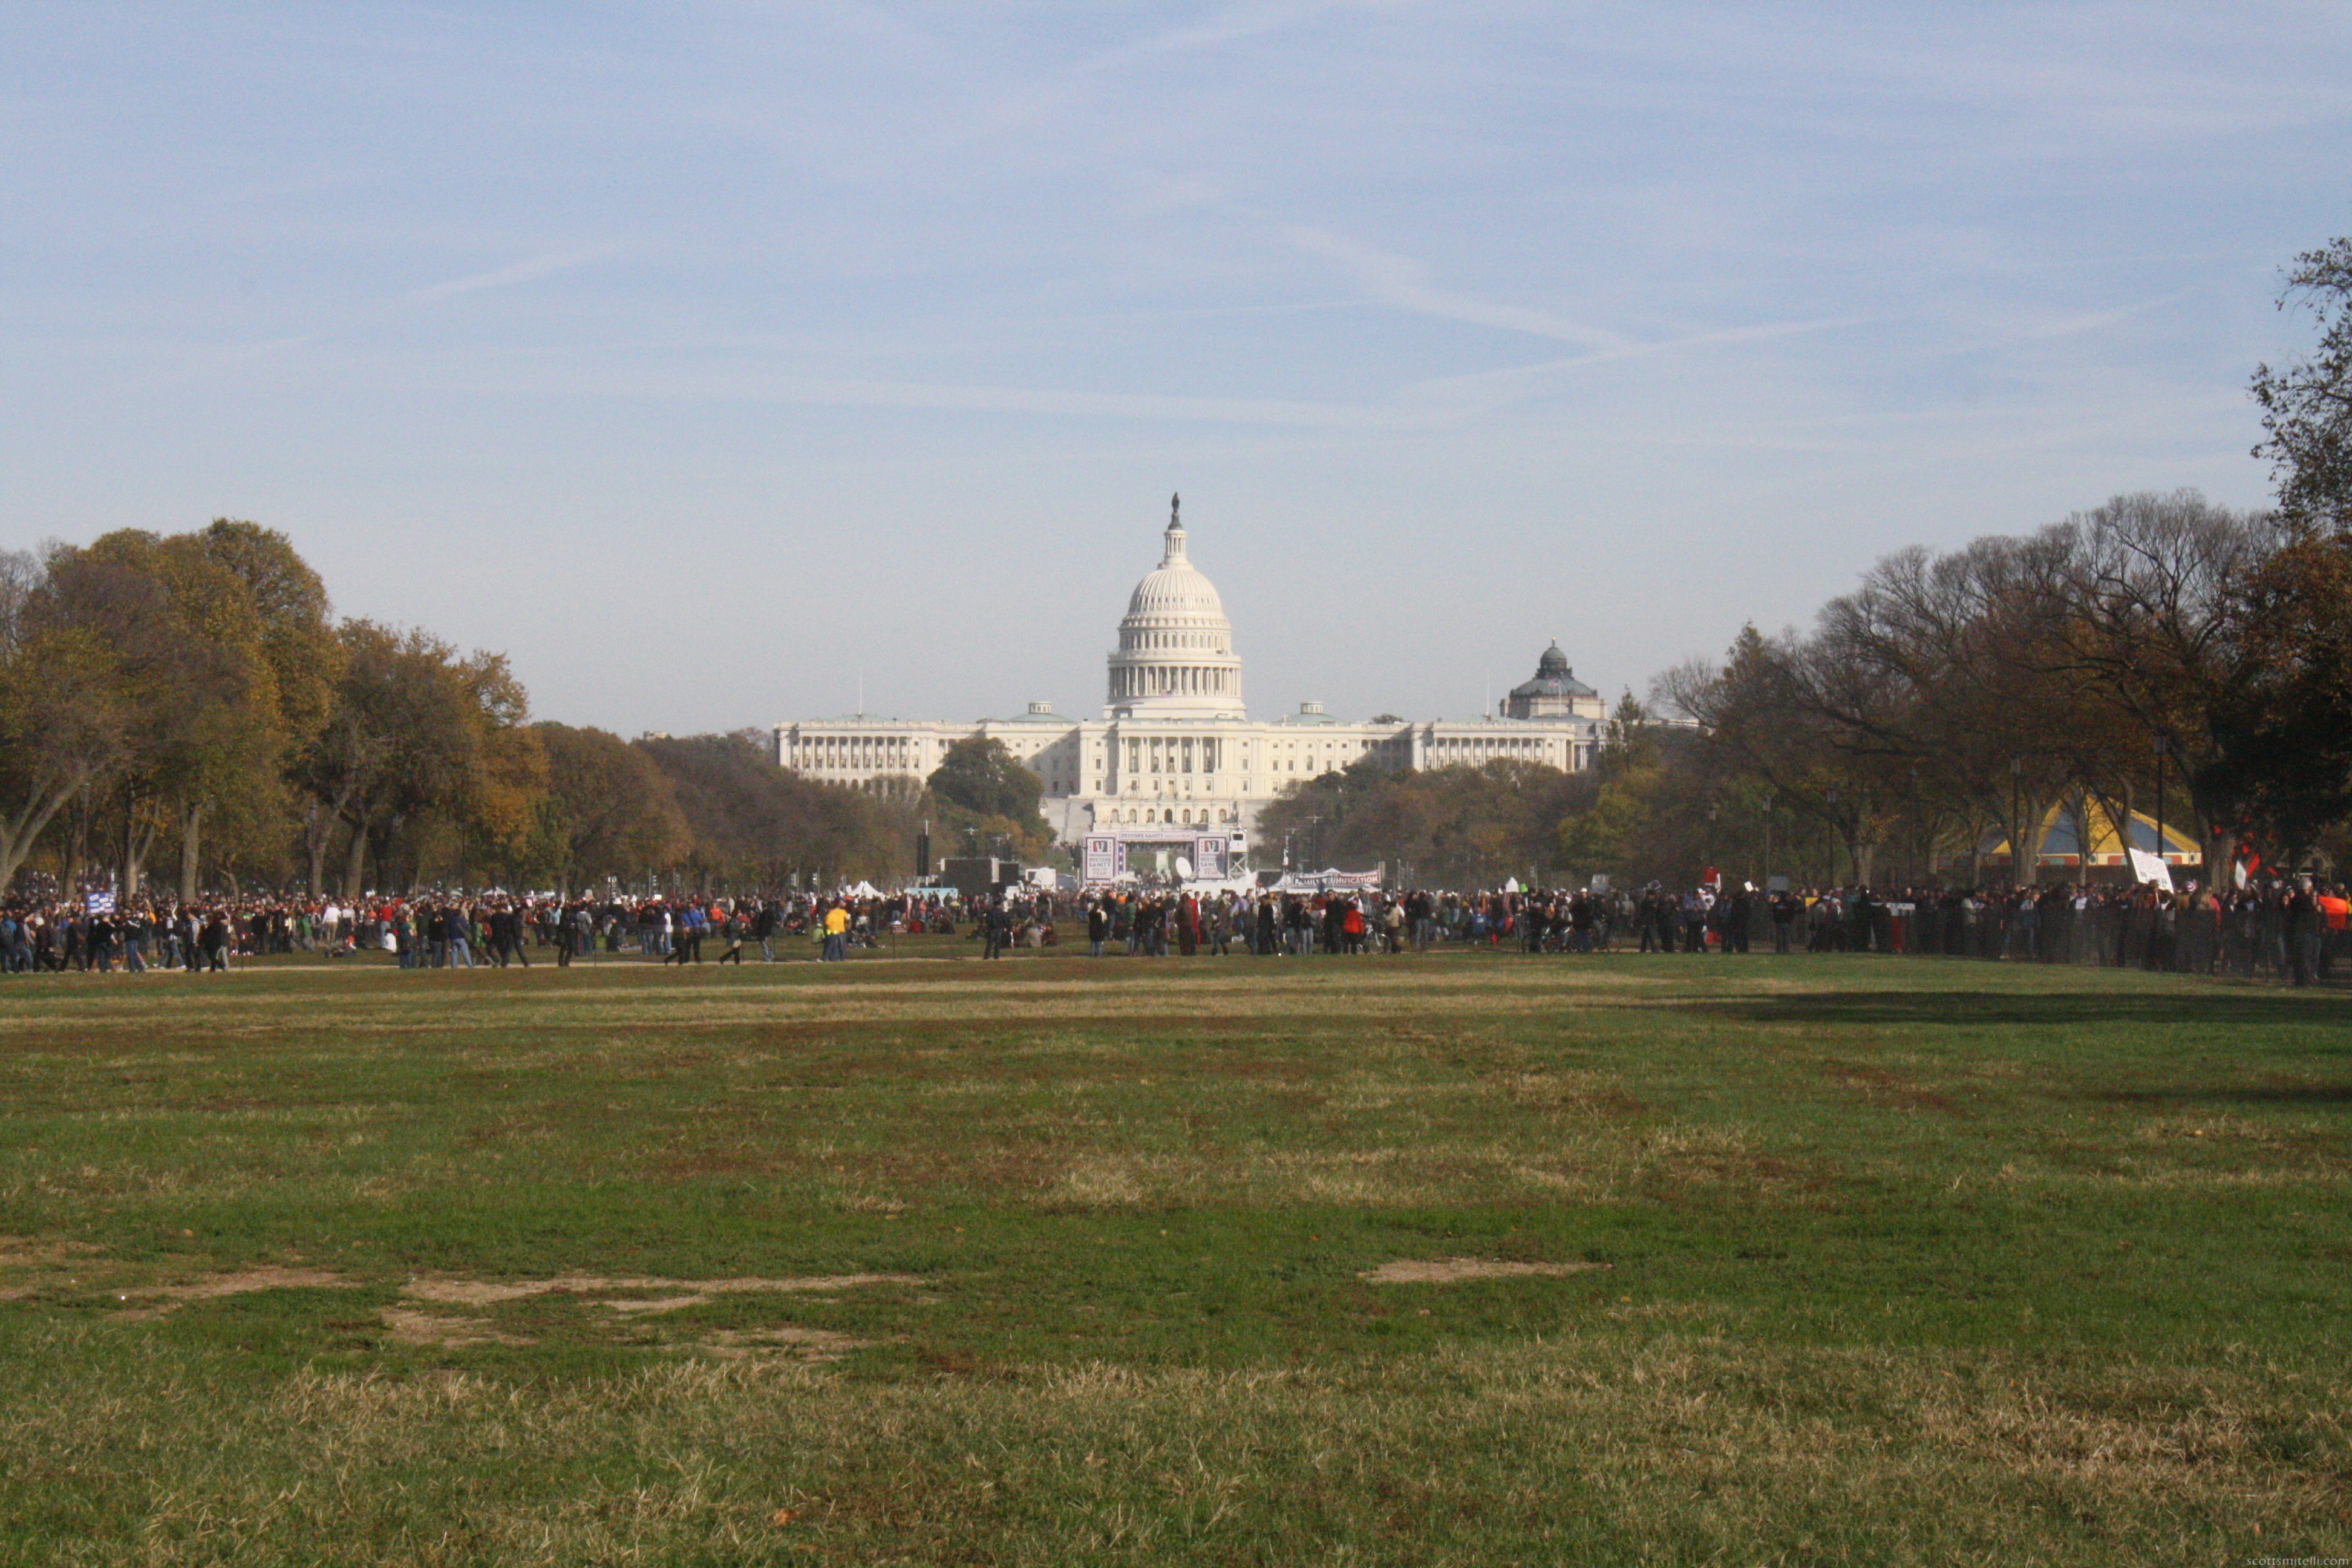 Less crowded view of the Capitol